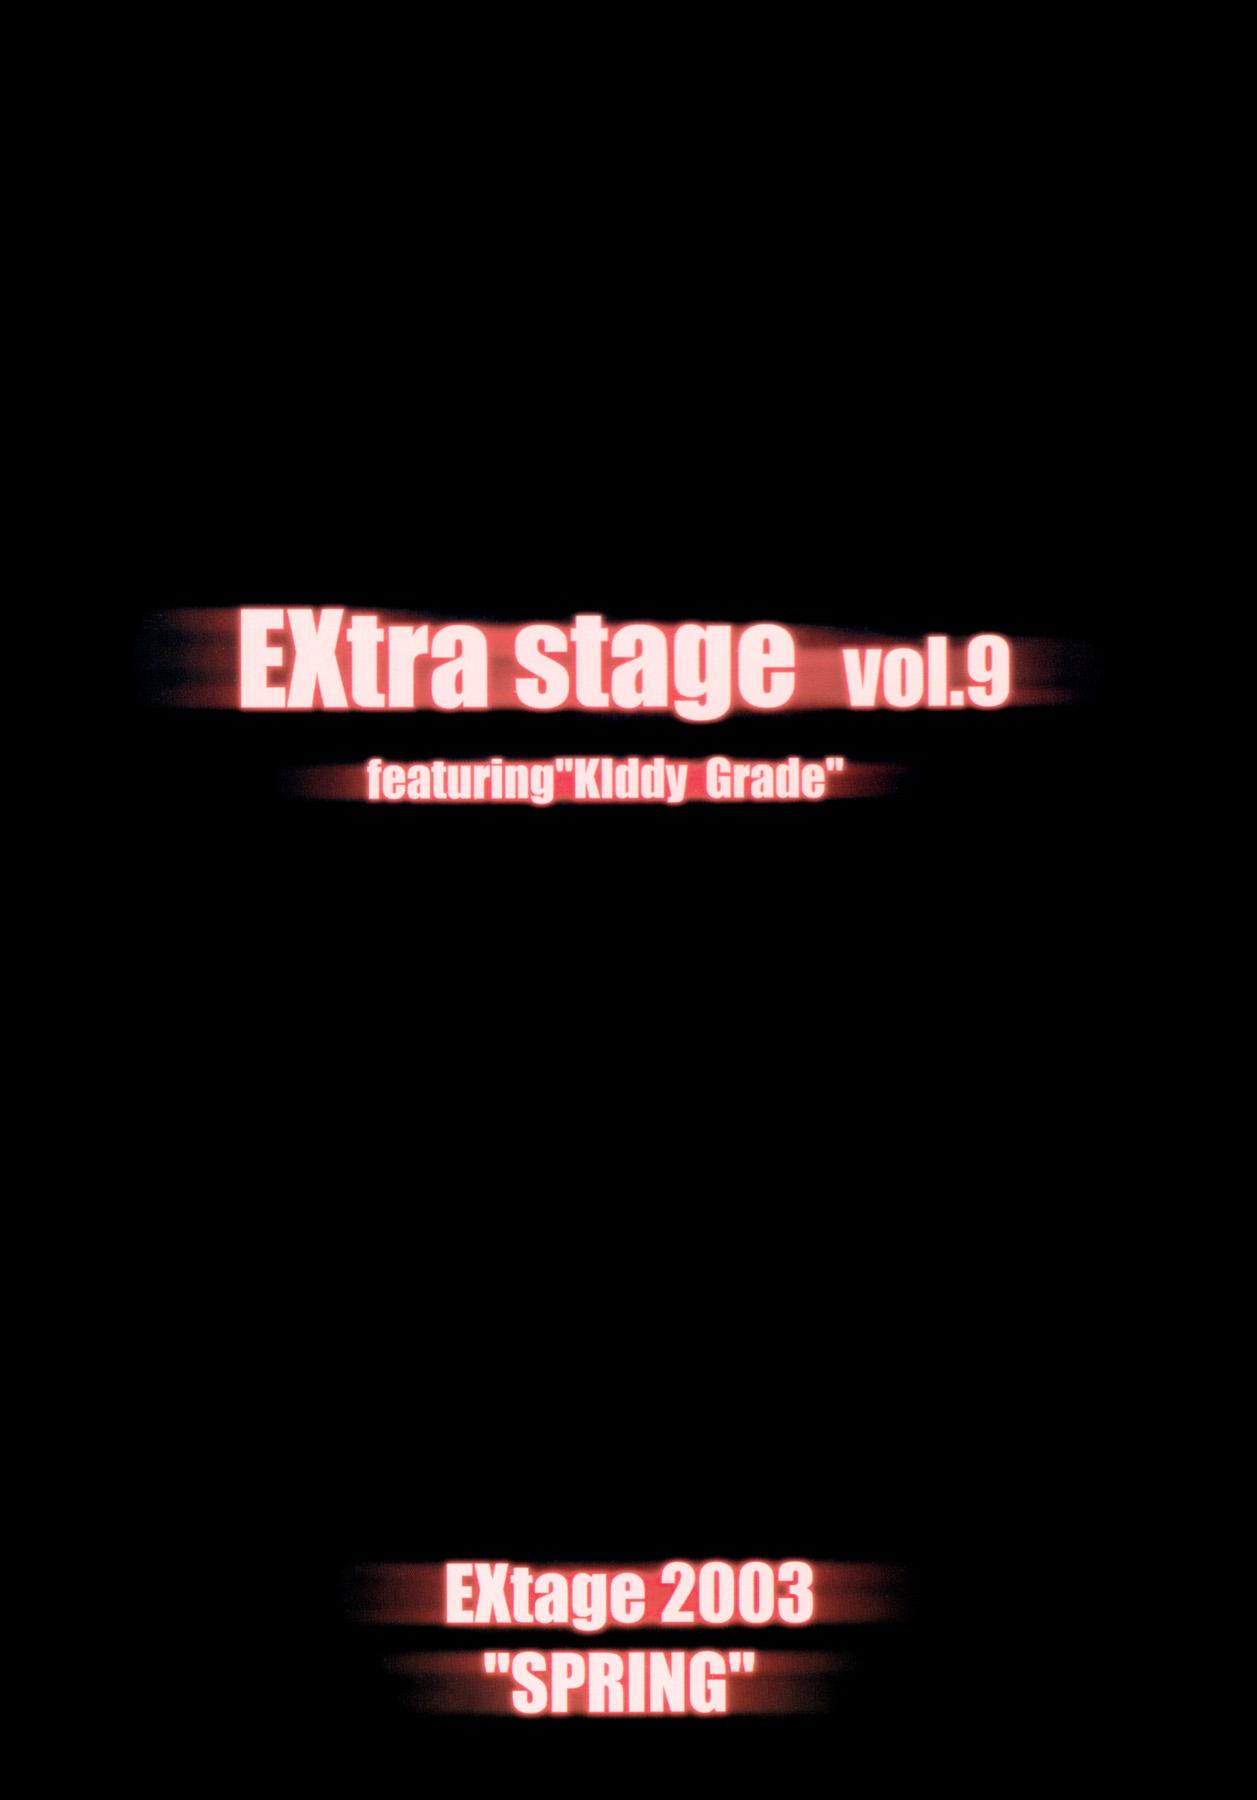 EXtra stage vol.9 21